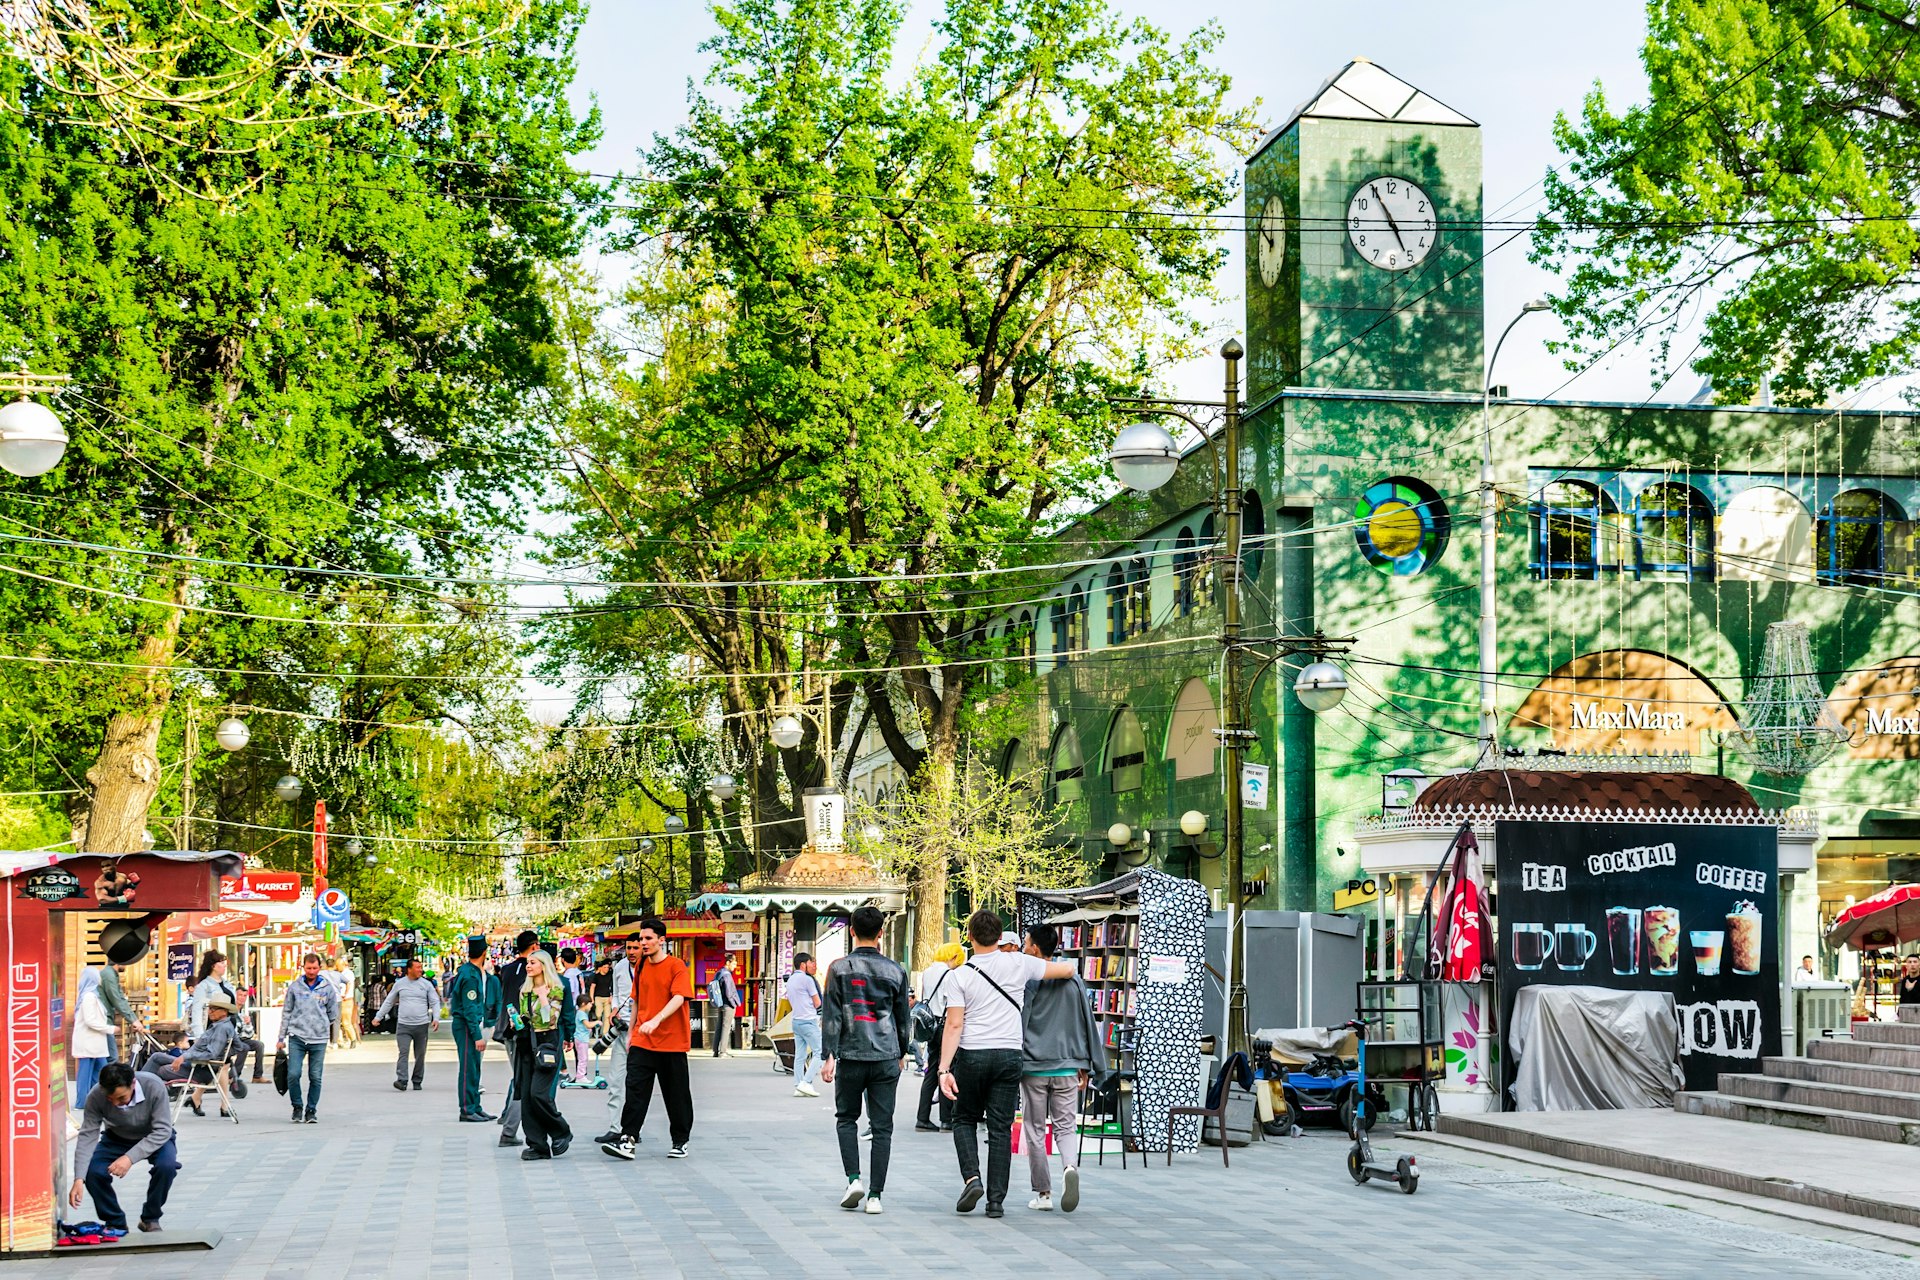 People walk down a tree-lined pedestrianized street lined with kiosks and stalls